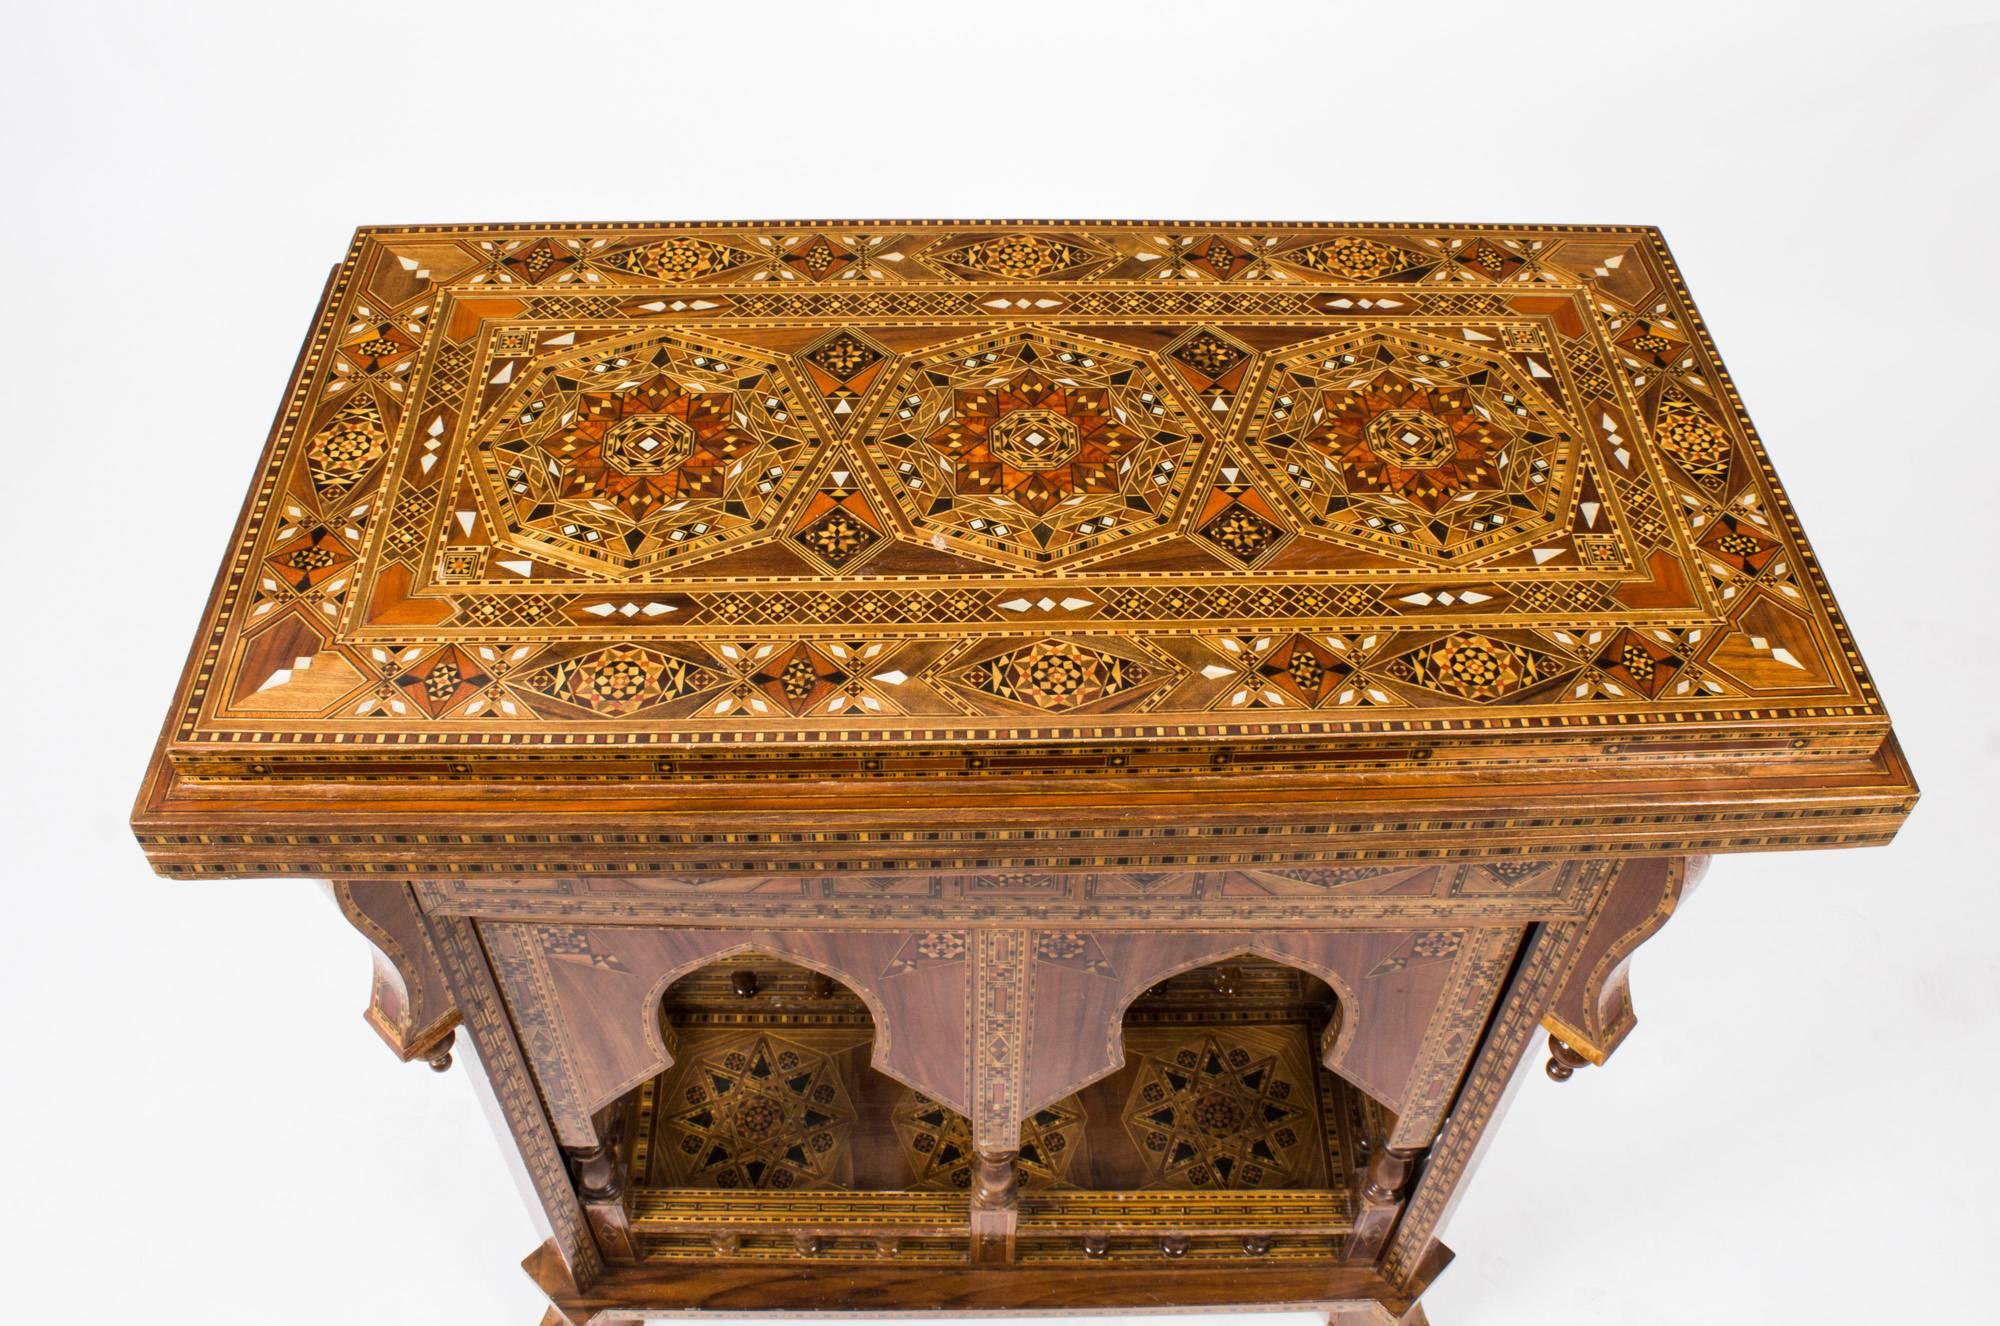 This is a profusely inlaid Syrian Parquetry games table, circa 1900 in date.

This games table is multi-functional, when closed it can be used as a side table, when open it becomes a card table, a chess or draughts table, or a backgammon table. It